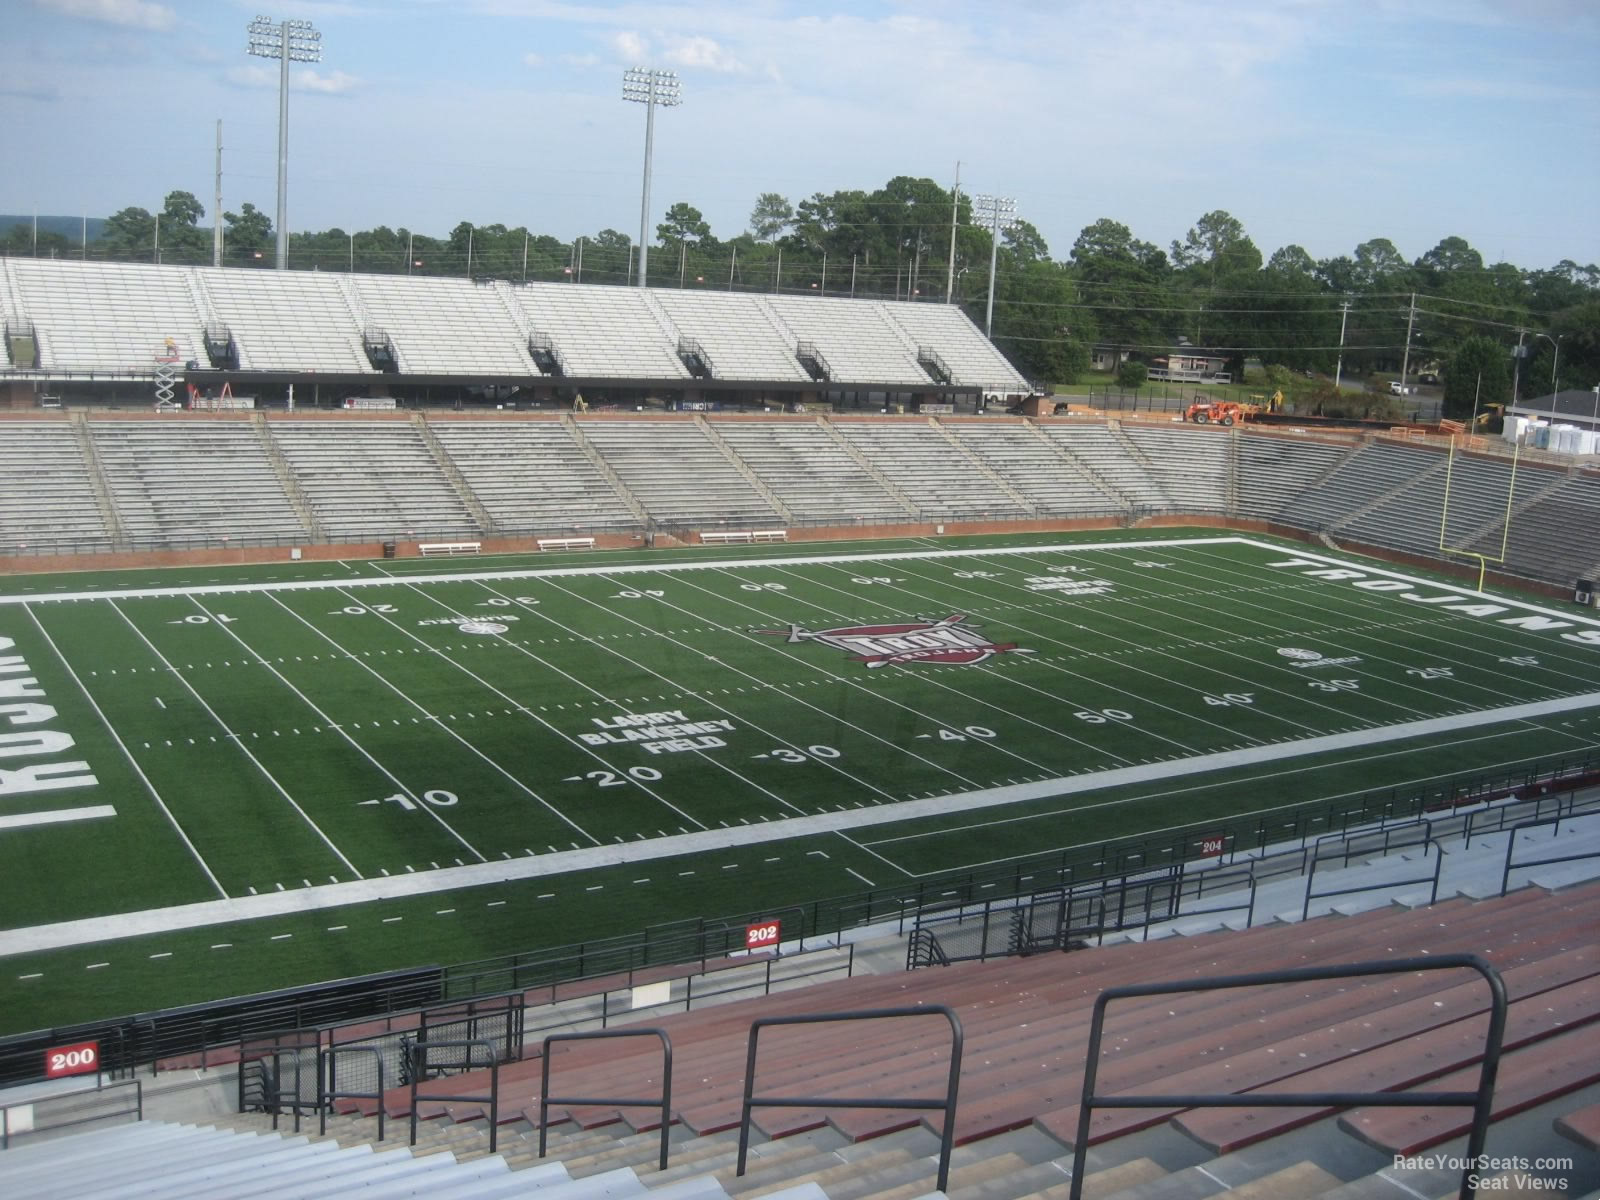 section 200, row 30 seat view  - troy memorial stadium